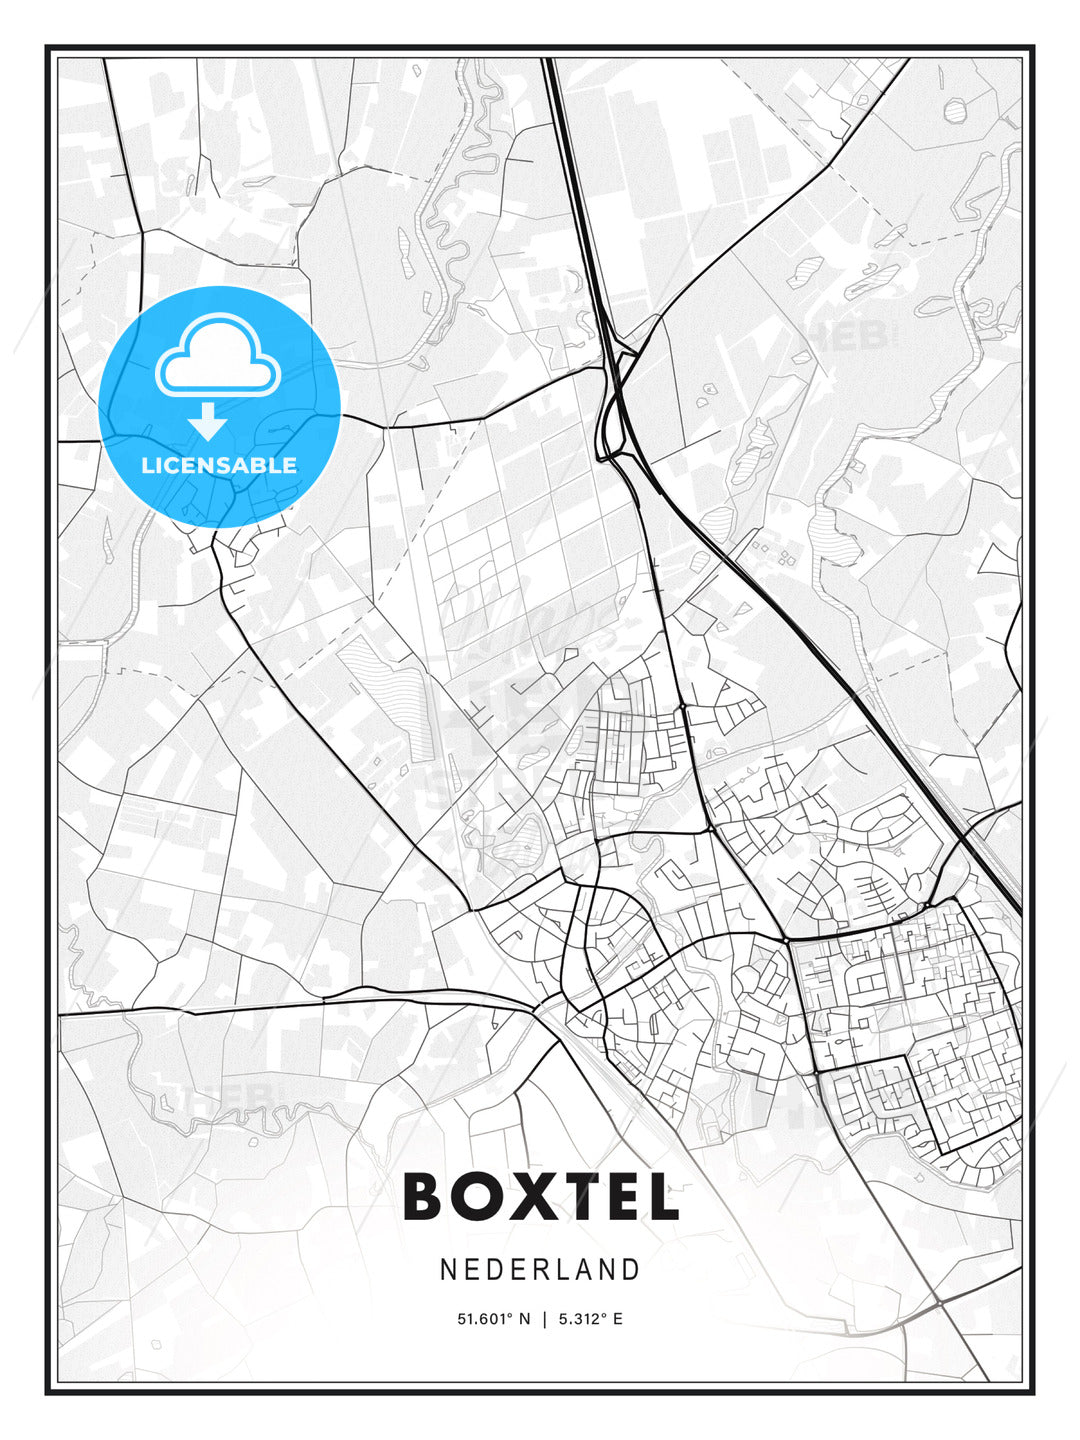 Boxtel, Netherlands, Modern Print Template in Various Formats - HEBSTREITS Sketches